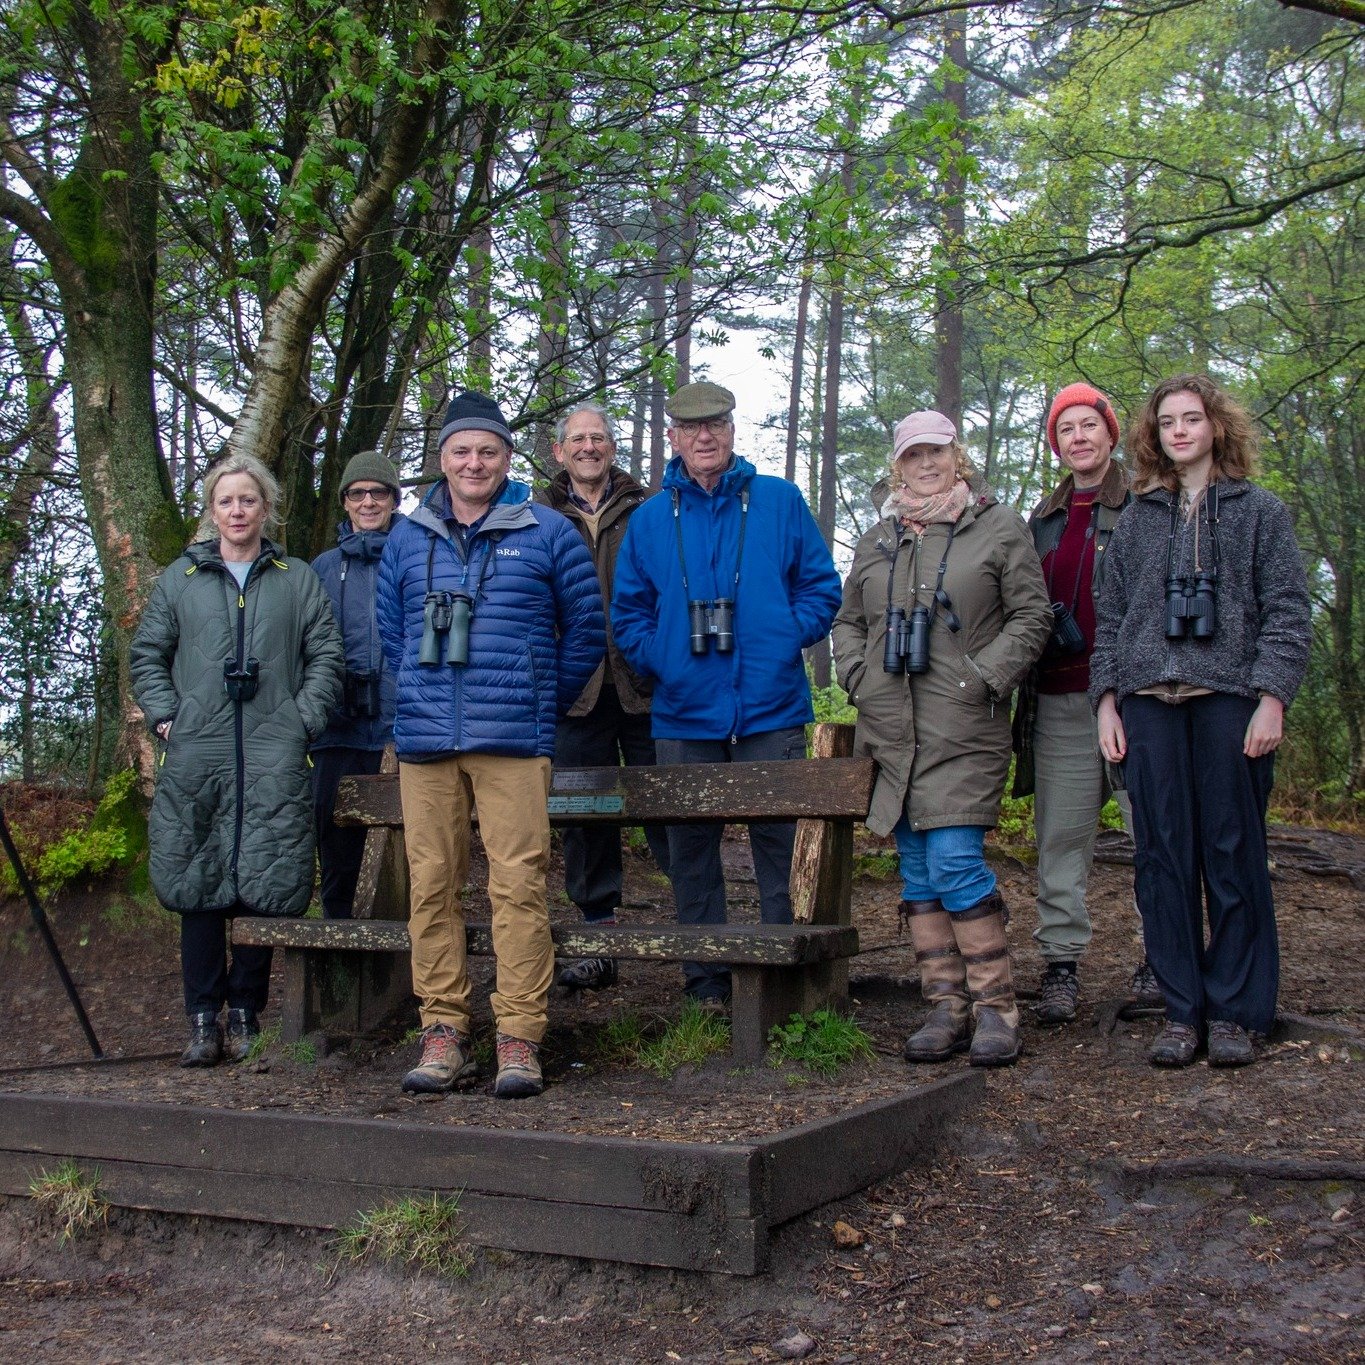 Despite the weather's confusion at quite what time of year it actually is, a lovely group of people of all ages wrapped up warm and joined experienced birder, Paul Matson, for a fascinating walk on Black Down early on Saturday morning. 

The damp clo